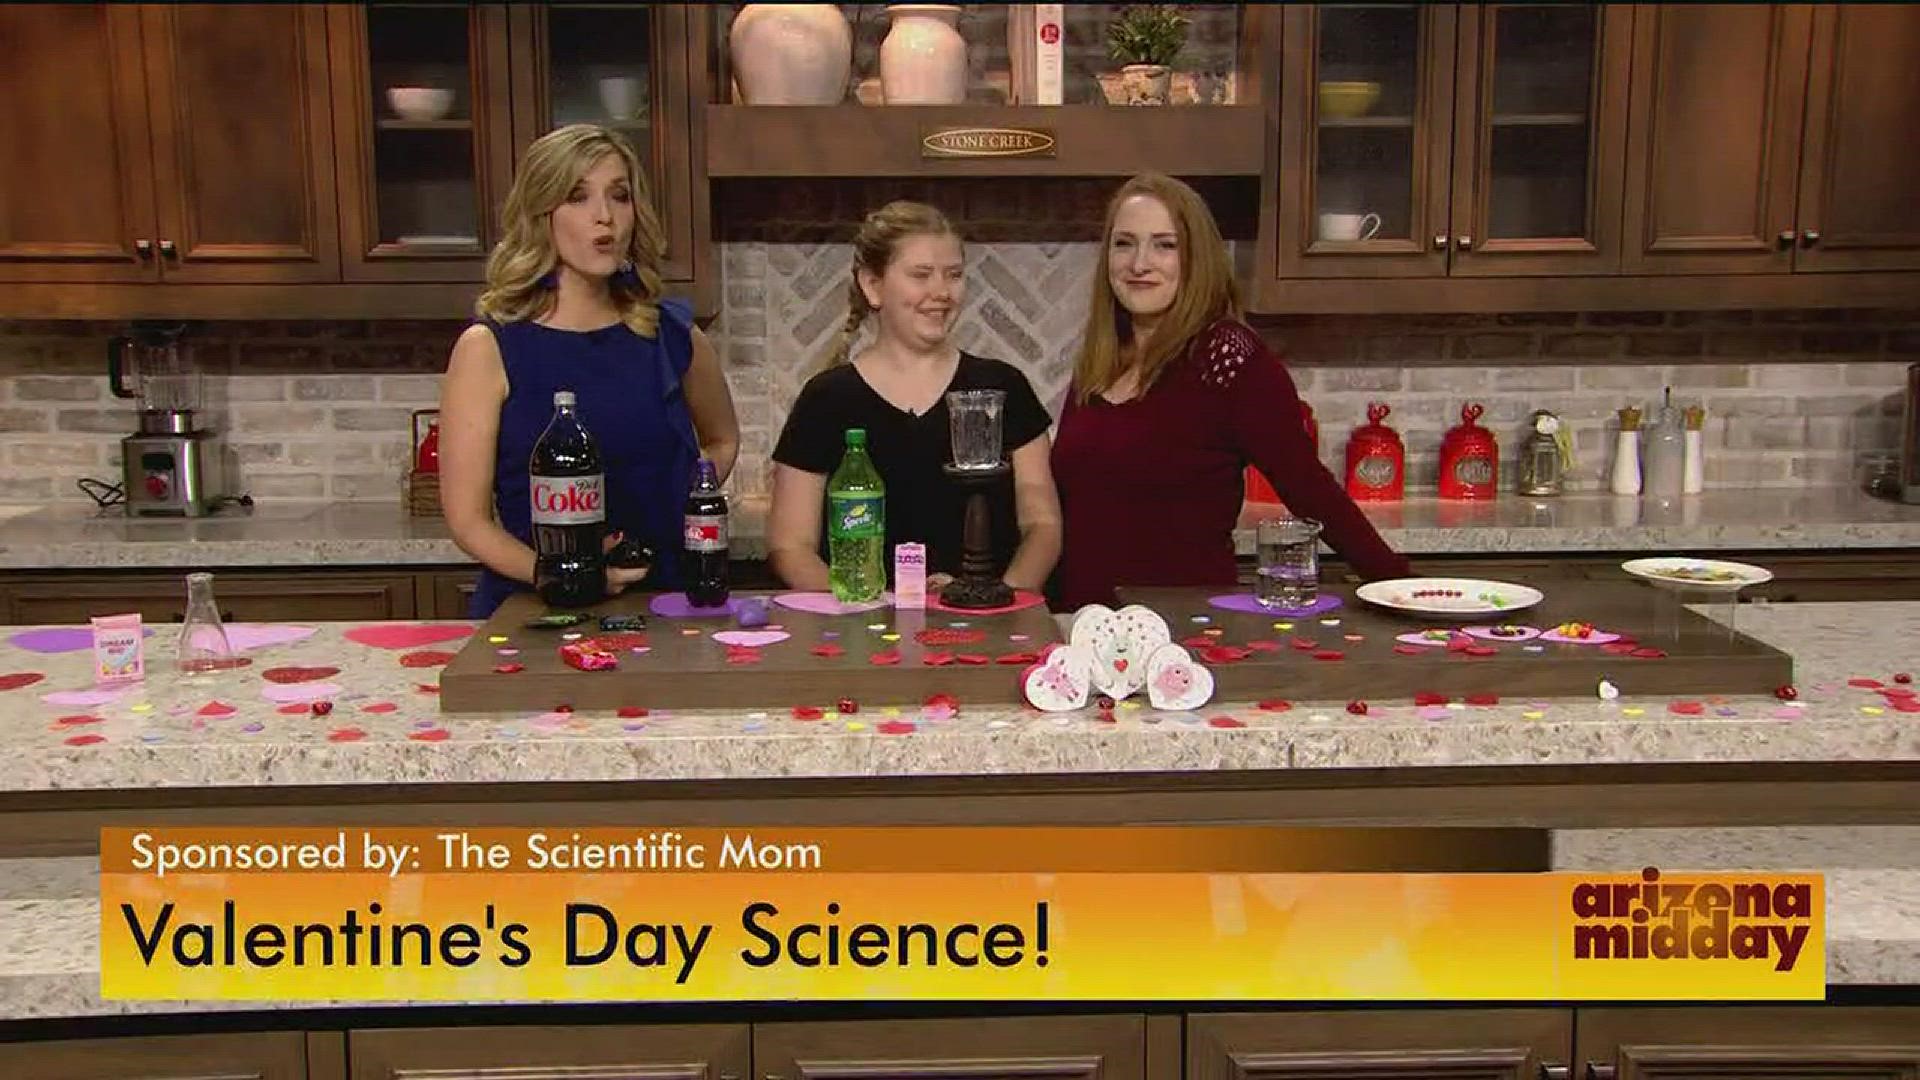 The Scientific Mom experiments with Valentine's Day Candies